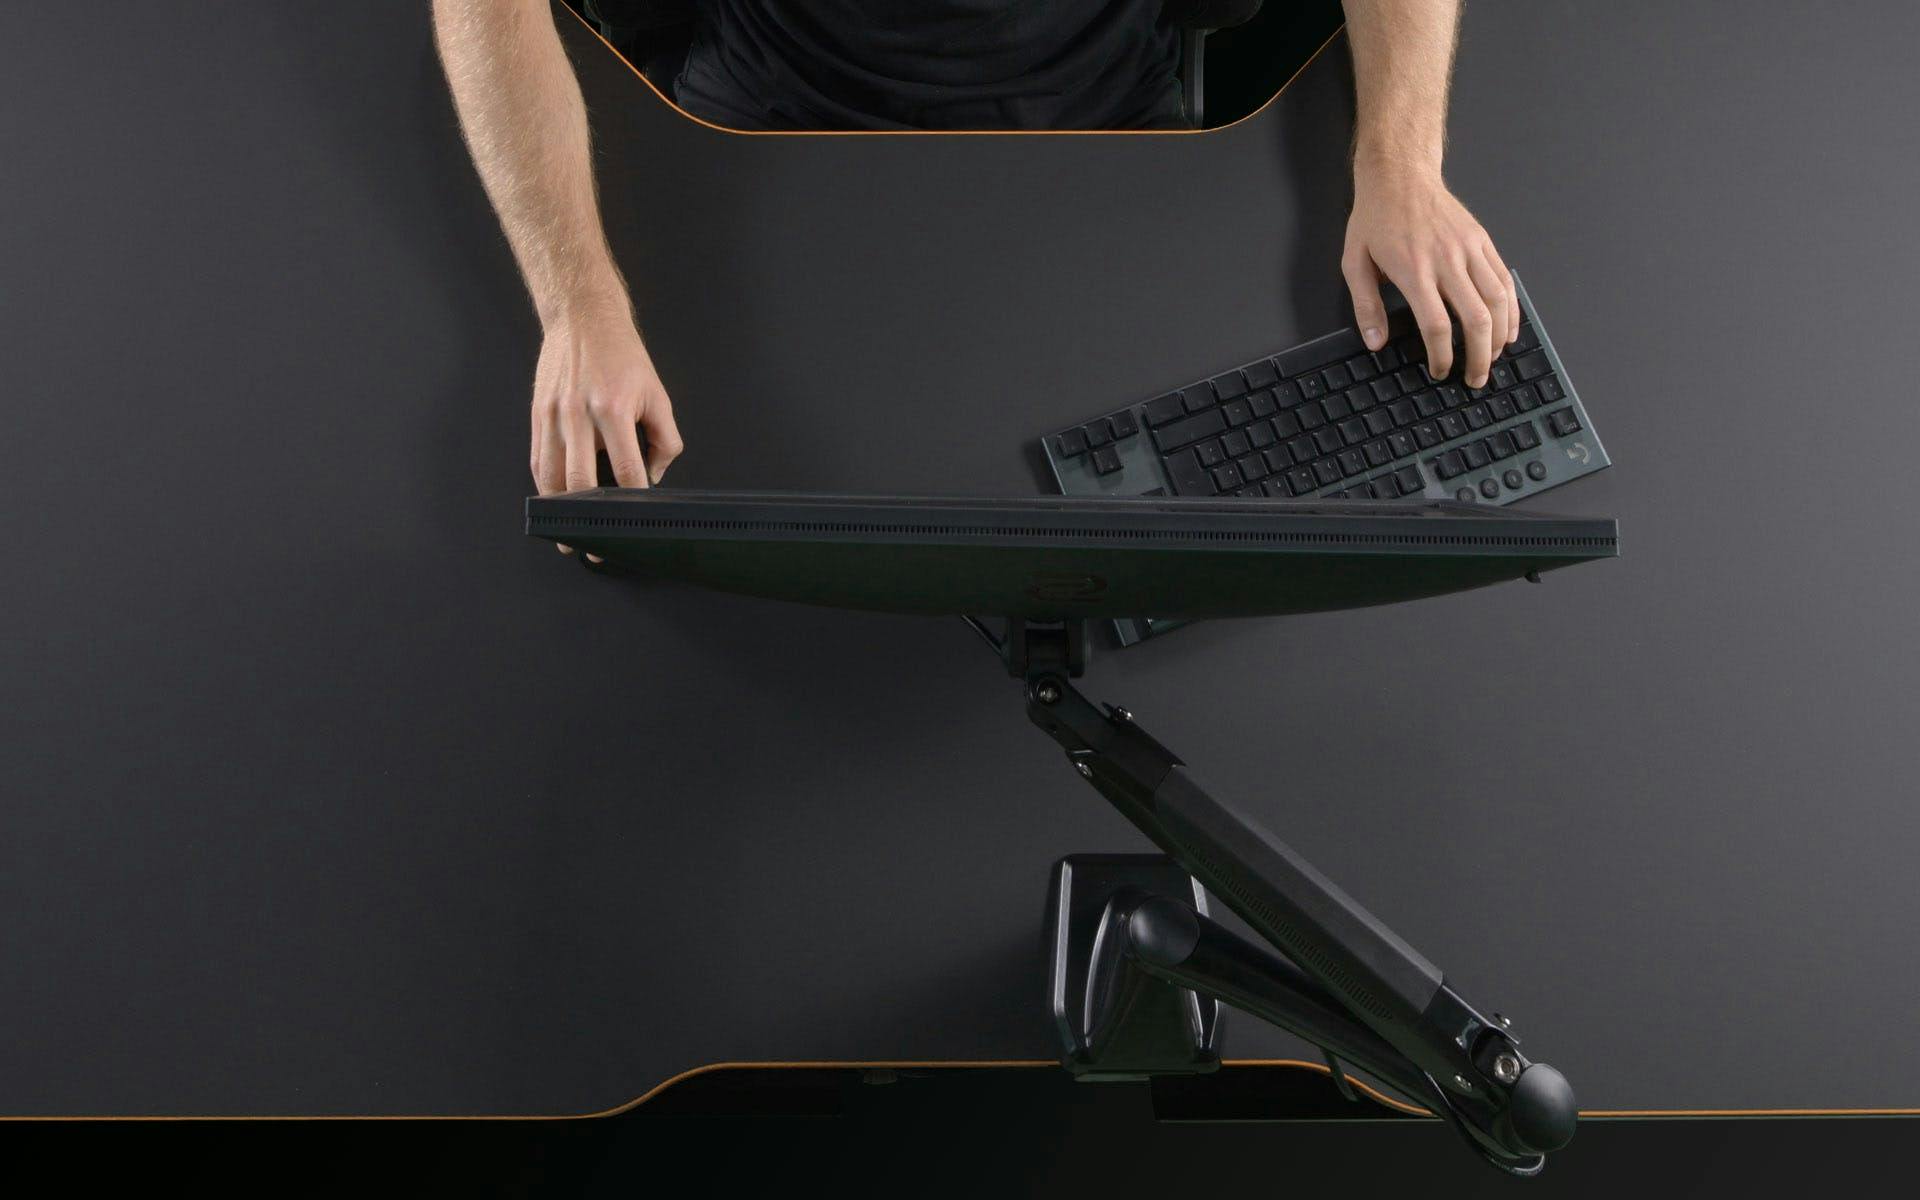 More flexibility with a monitor arm | Credit: LeetDesk